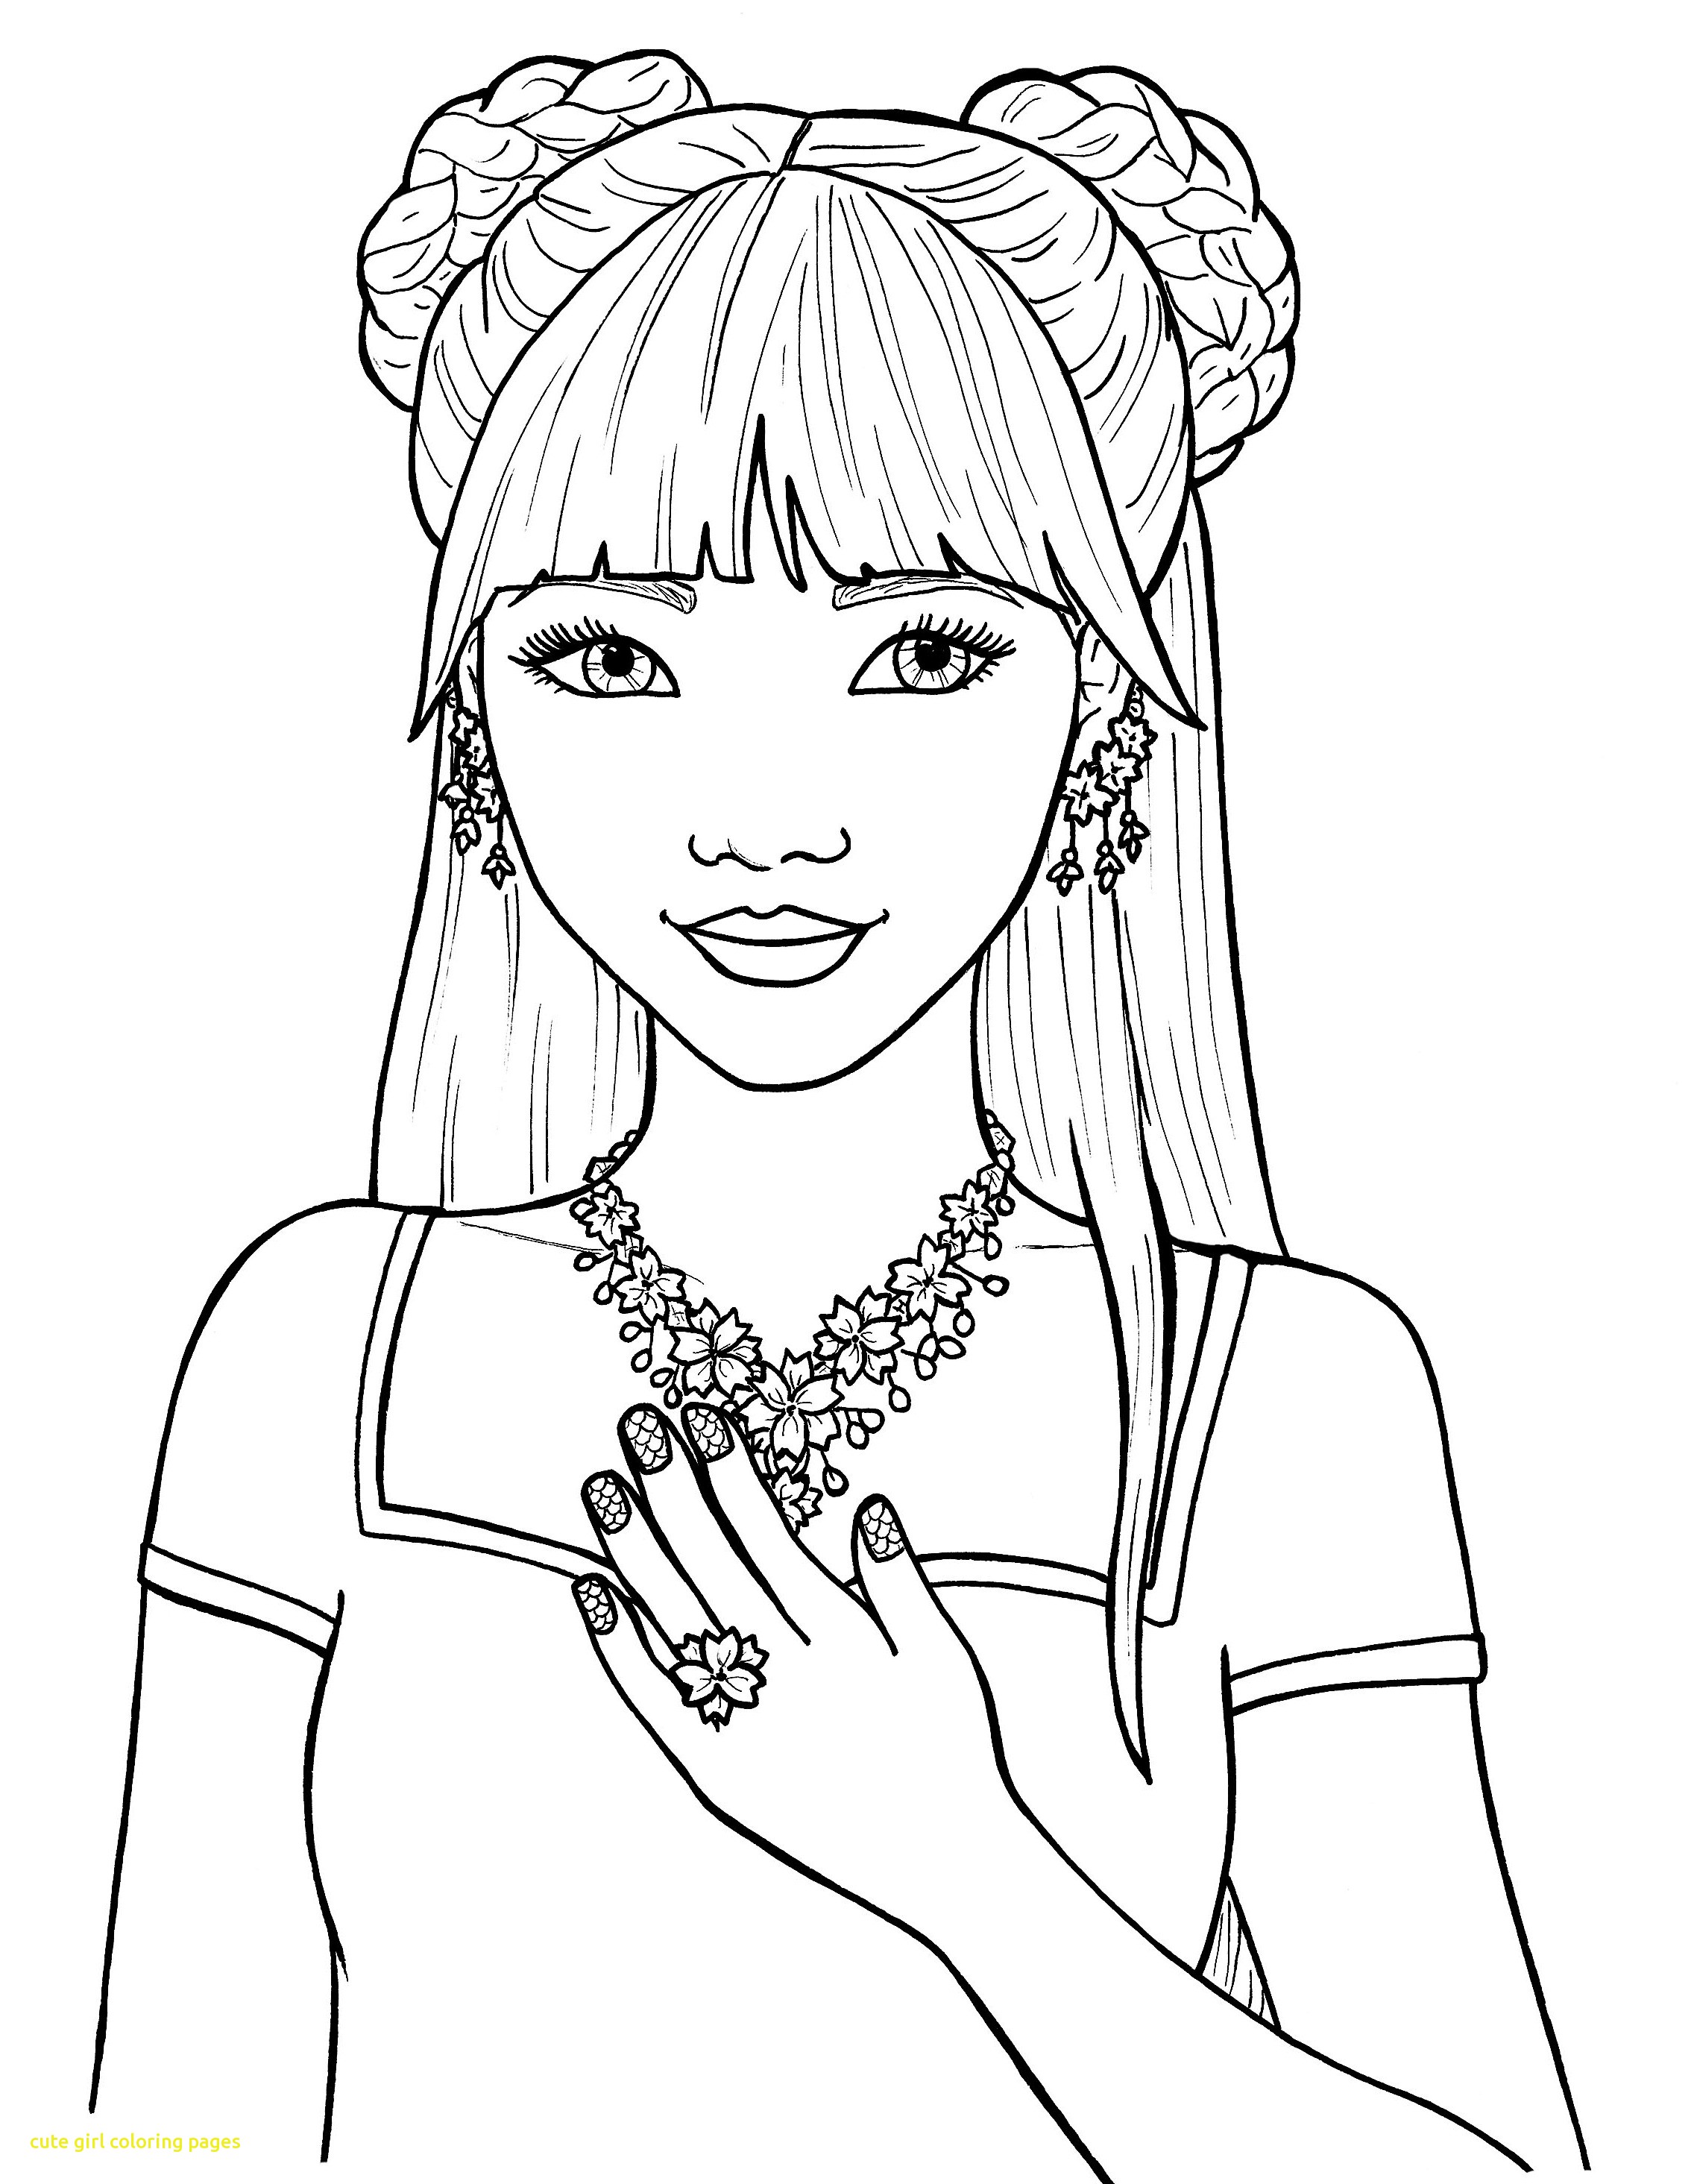 Coloring page   People coloring pages, Cute coloring pages ...